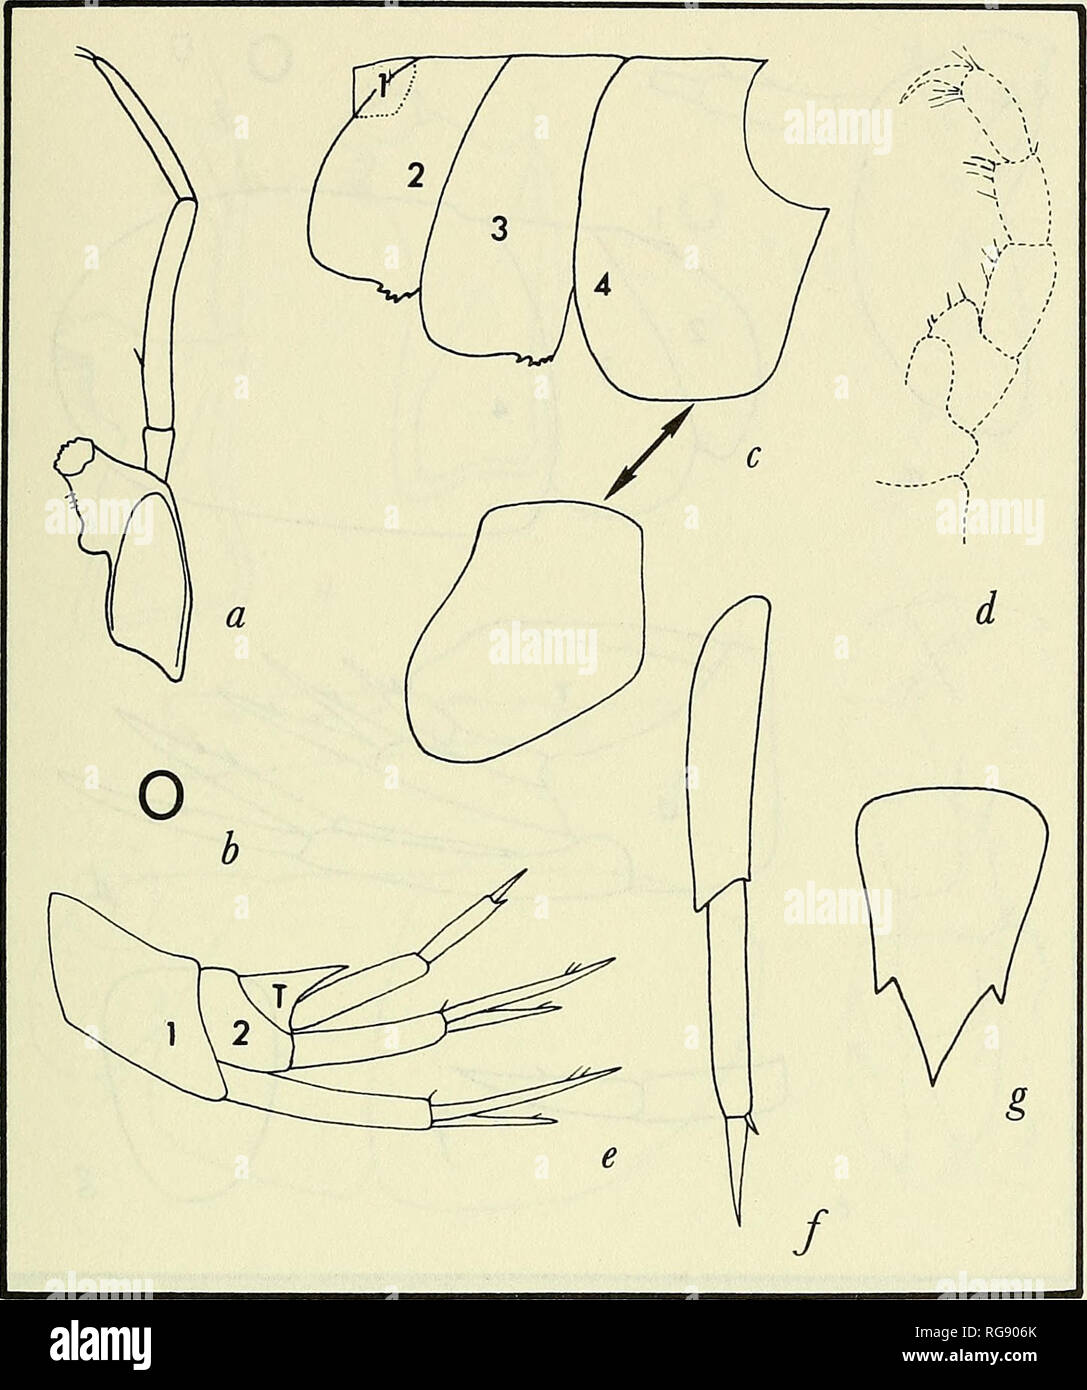 . Bulletin - United States National Museum. Science. MARINE GAMMARIDEAflSr AMPHIPODA 67. Figure 16.—Cressidae: a, mandible, note obsolescent molar; h, accessory flagellum absent; c, coxae 1—4, left to right, note coxa 4 often not completely shield-like [see Thaumatel- sonidae, Stenothoidae, Pagetinidae]; i, maxilliped, note reduced outer plate; e, urosome, left, note telson (T) fused with segment 3 [see Stenothoidae, Thaumatelsonidae];/, uropod 3, uniramous [see Amphilochidae]; g, telson. Article 2 of pereopod 3 is always expanded in Cressidae, unlike Stenothoidae.. Please note that these imag Stock Photo